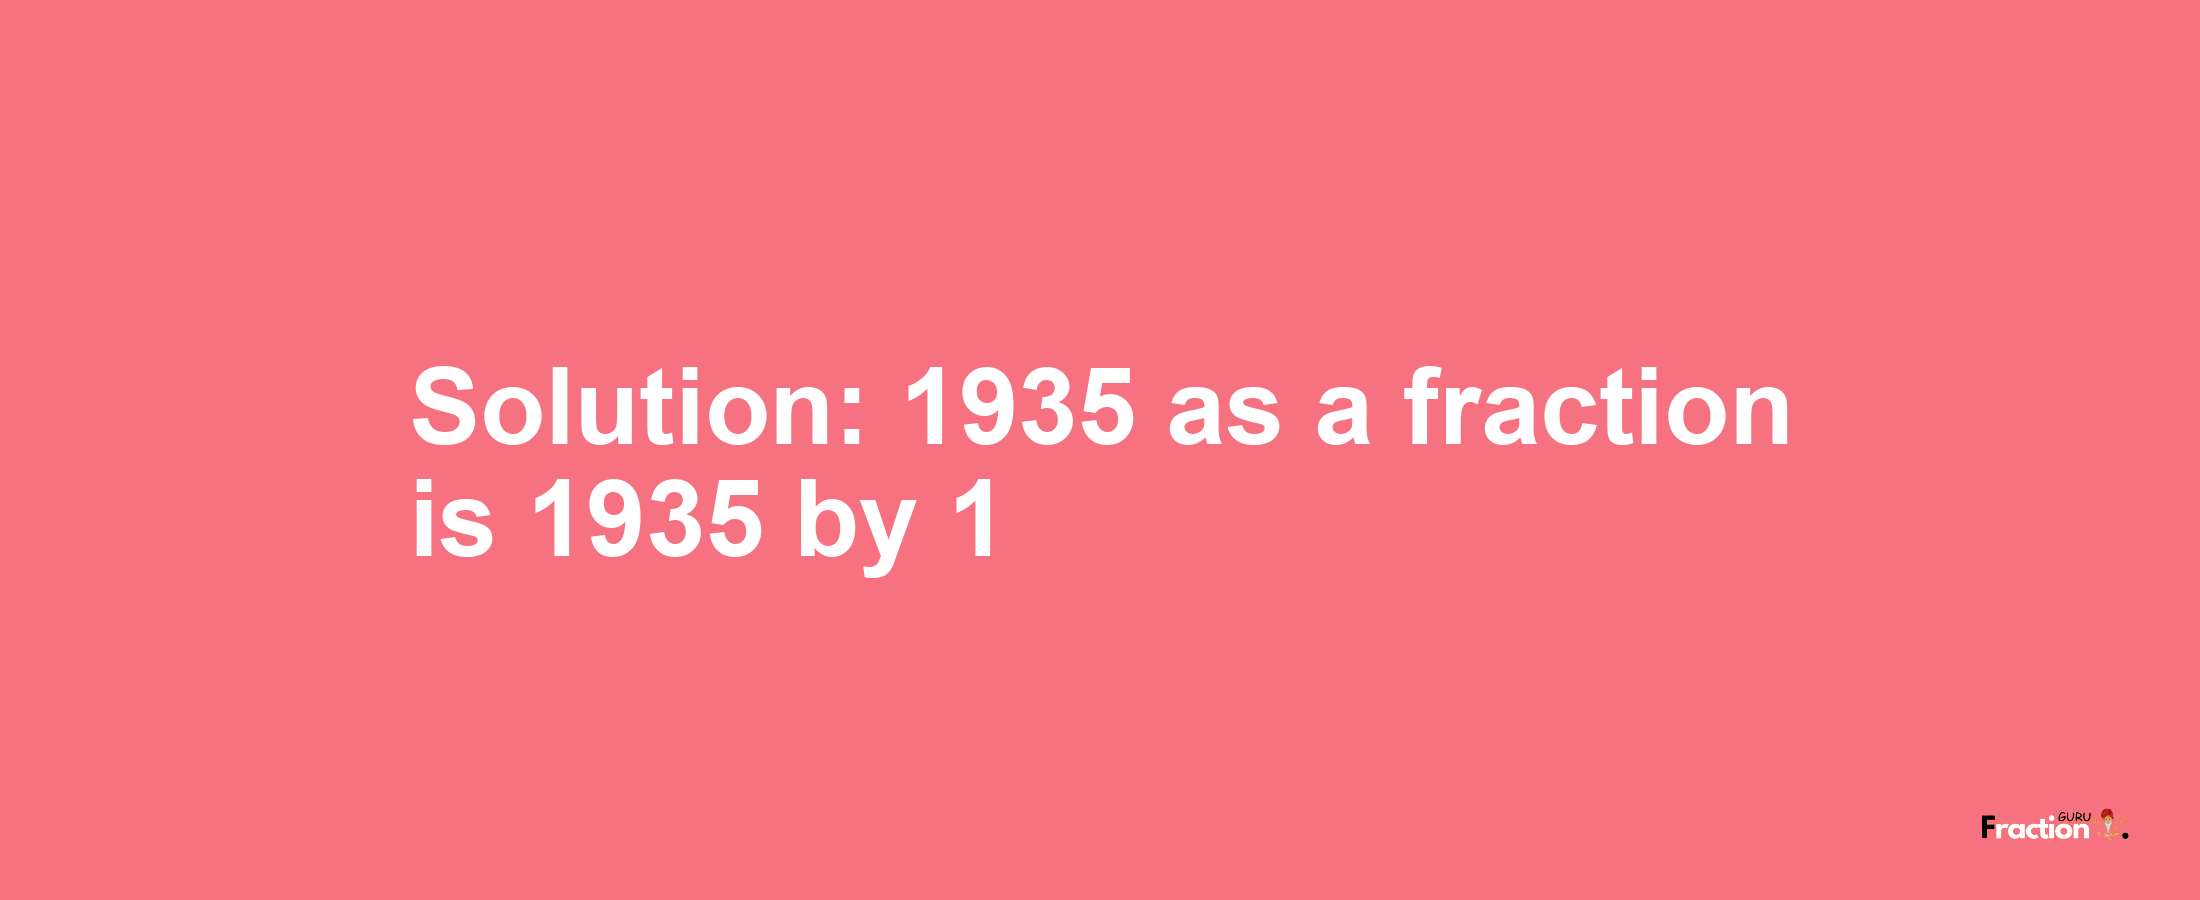 Solution:1935 as a fraction is 1935/1